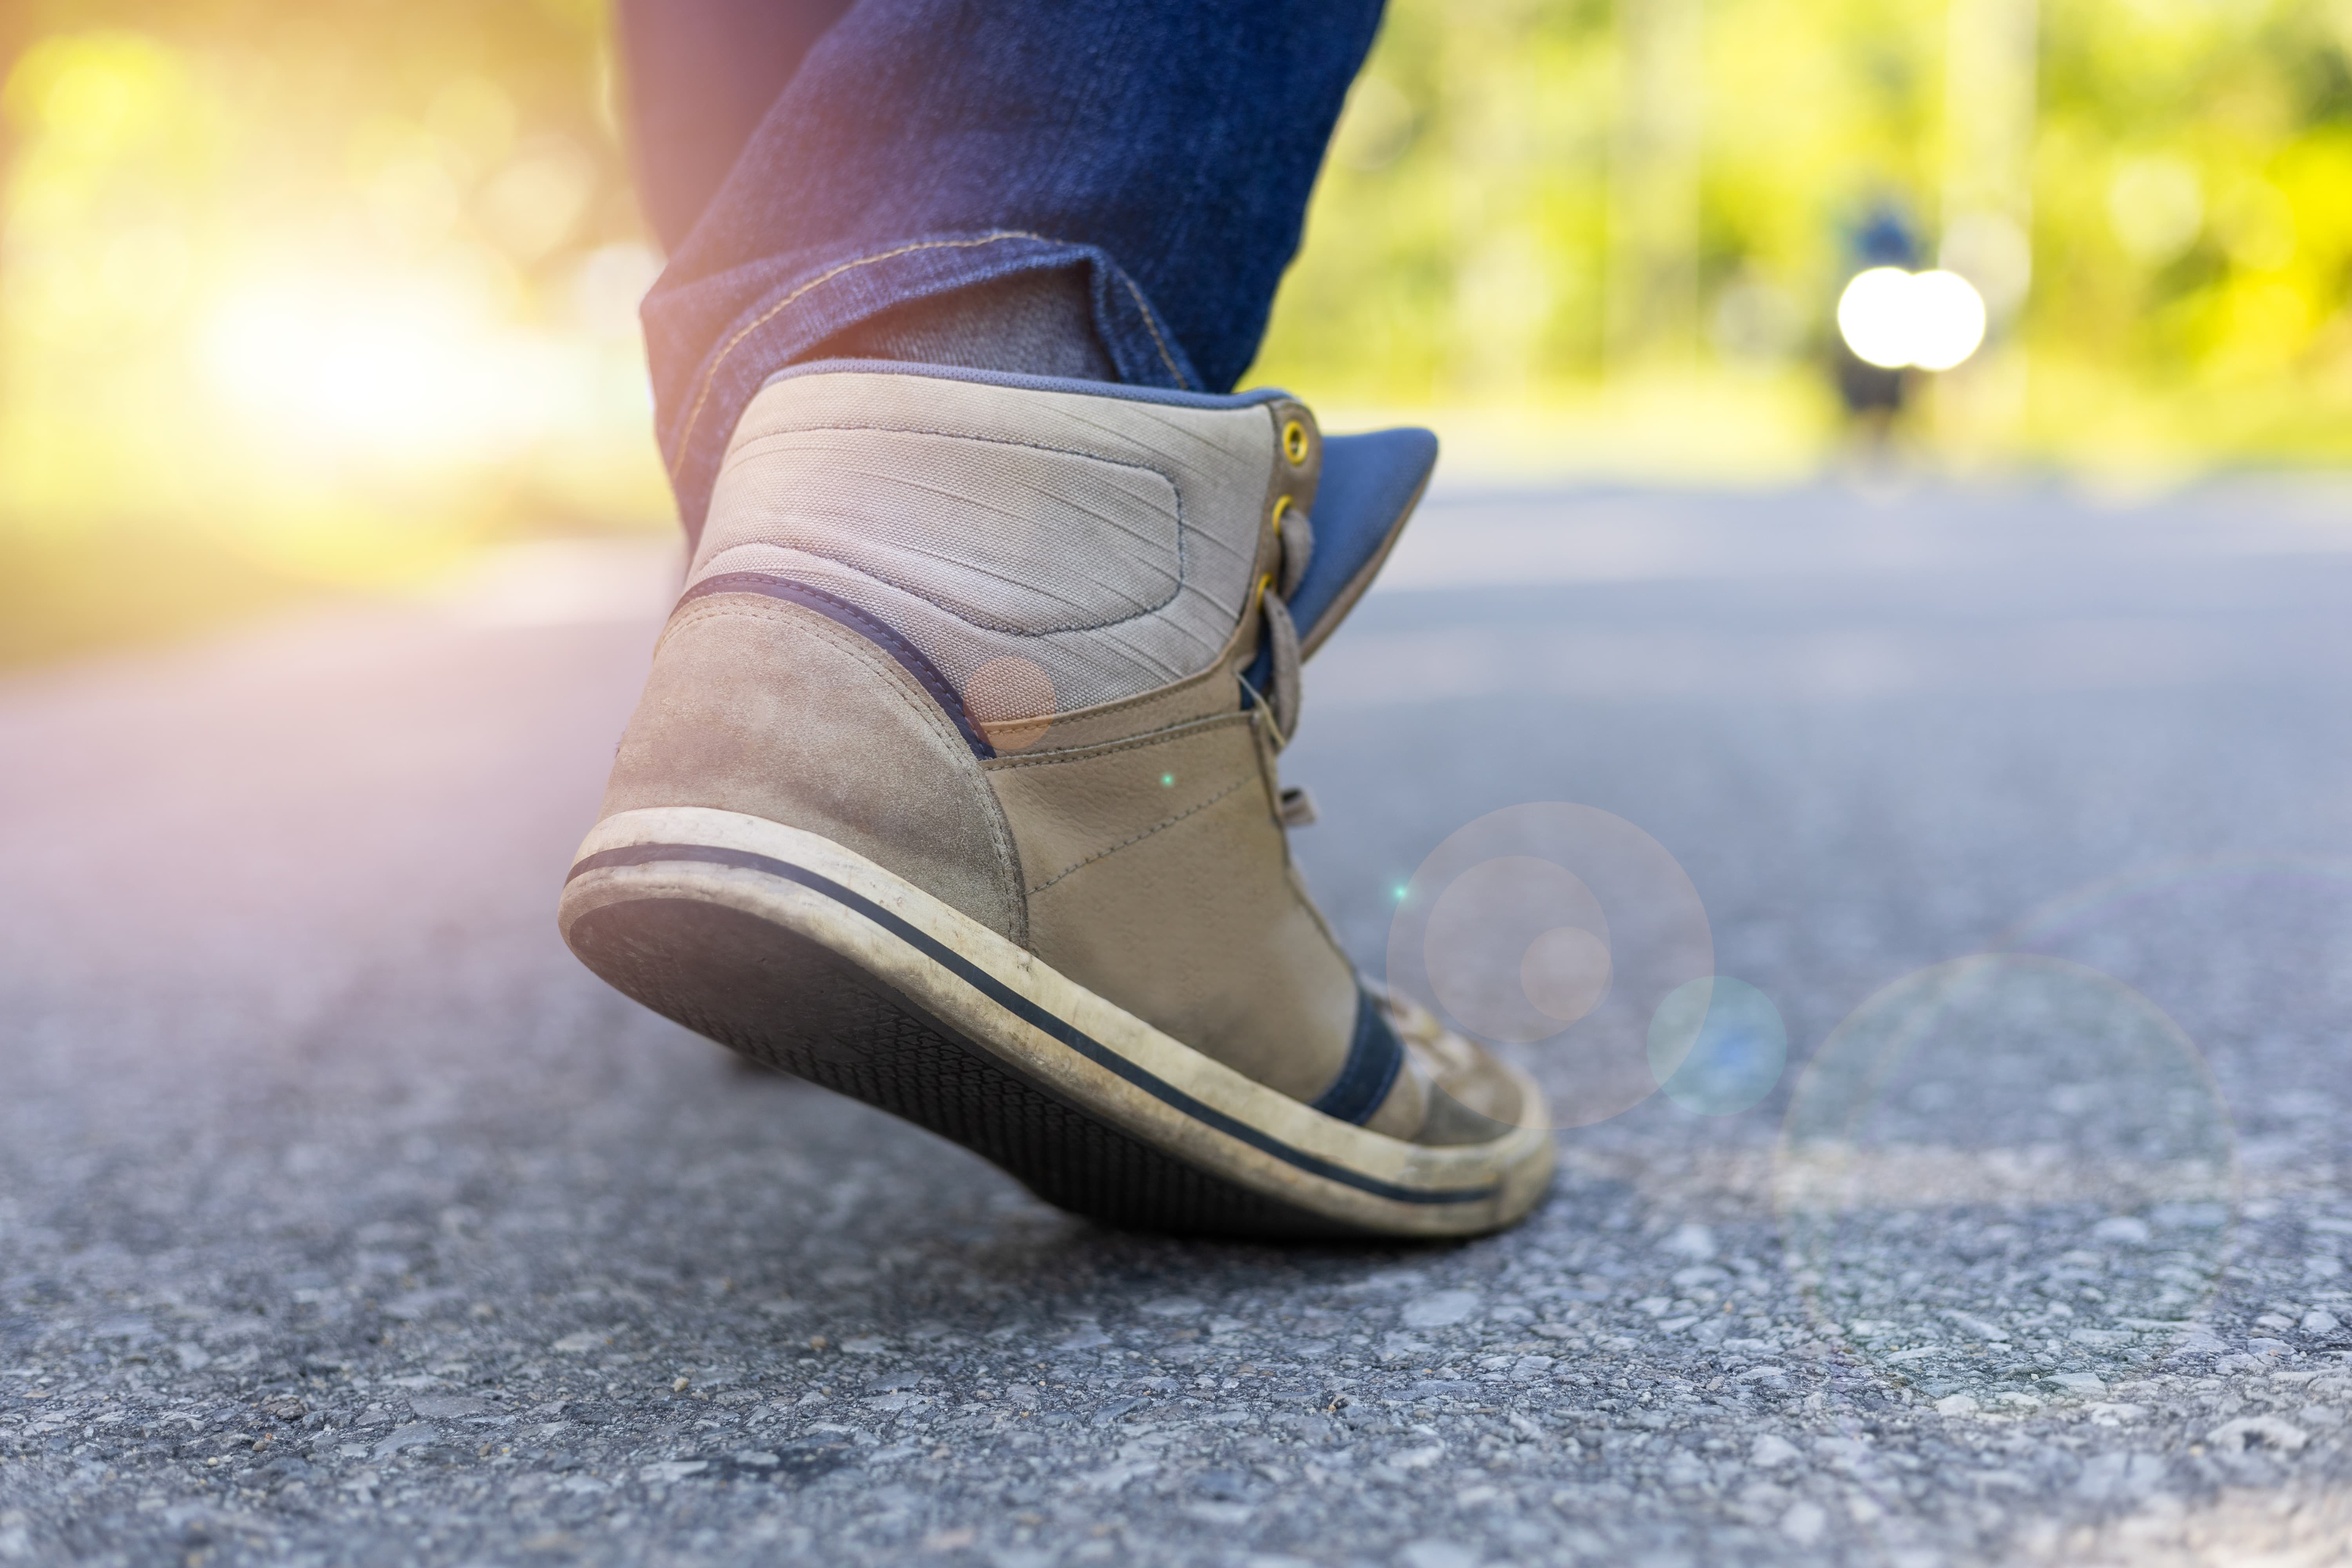 Some jobs involve standing for a long period of time on hard surfaces, for instance in factories and restaurants. Neutramotion Slim Insoles have a 3D arch structure and vibration-absorbing PORON material that help make end-of-day fatigue a thing of the past.